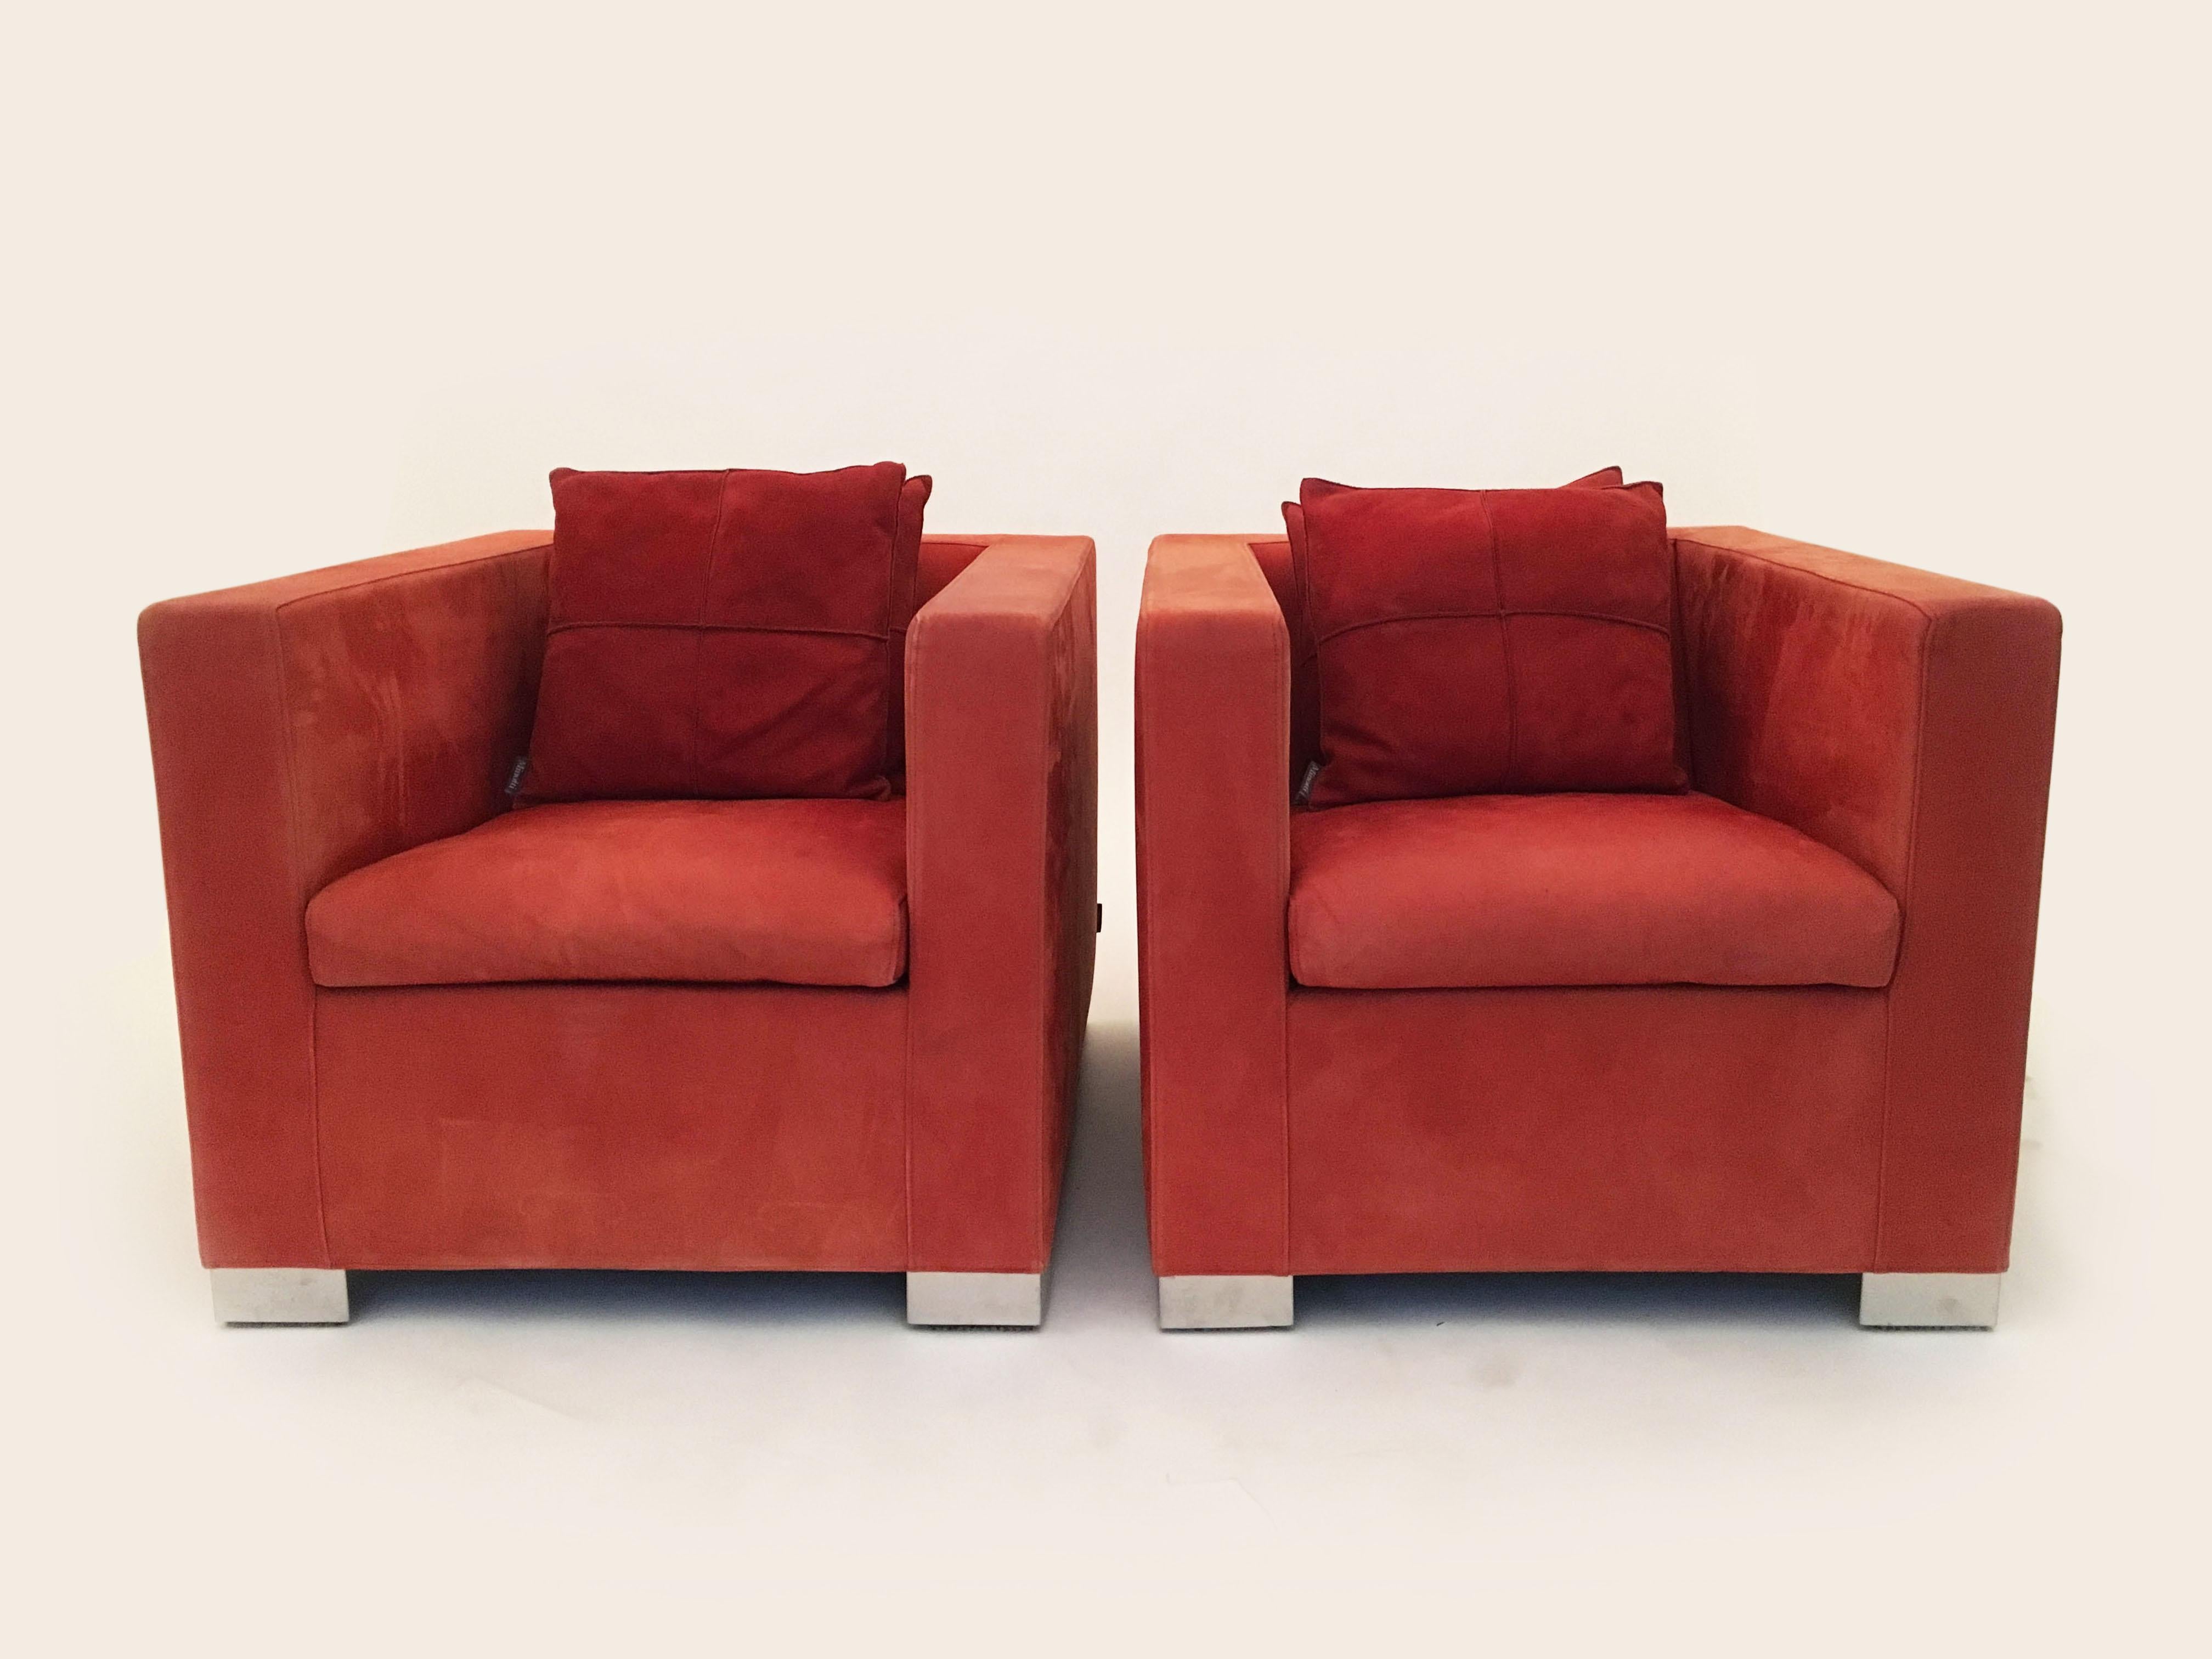 A vintage set of two “Suitcase” armchairs designed by Rodolfo Dordoni for Minotti in the 1980s. A modern interpretation of the classic club chairs of the Art Deco area of the 1920. All original suede leather in burned red, the color has been aged